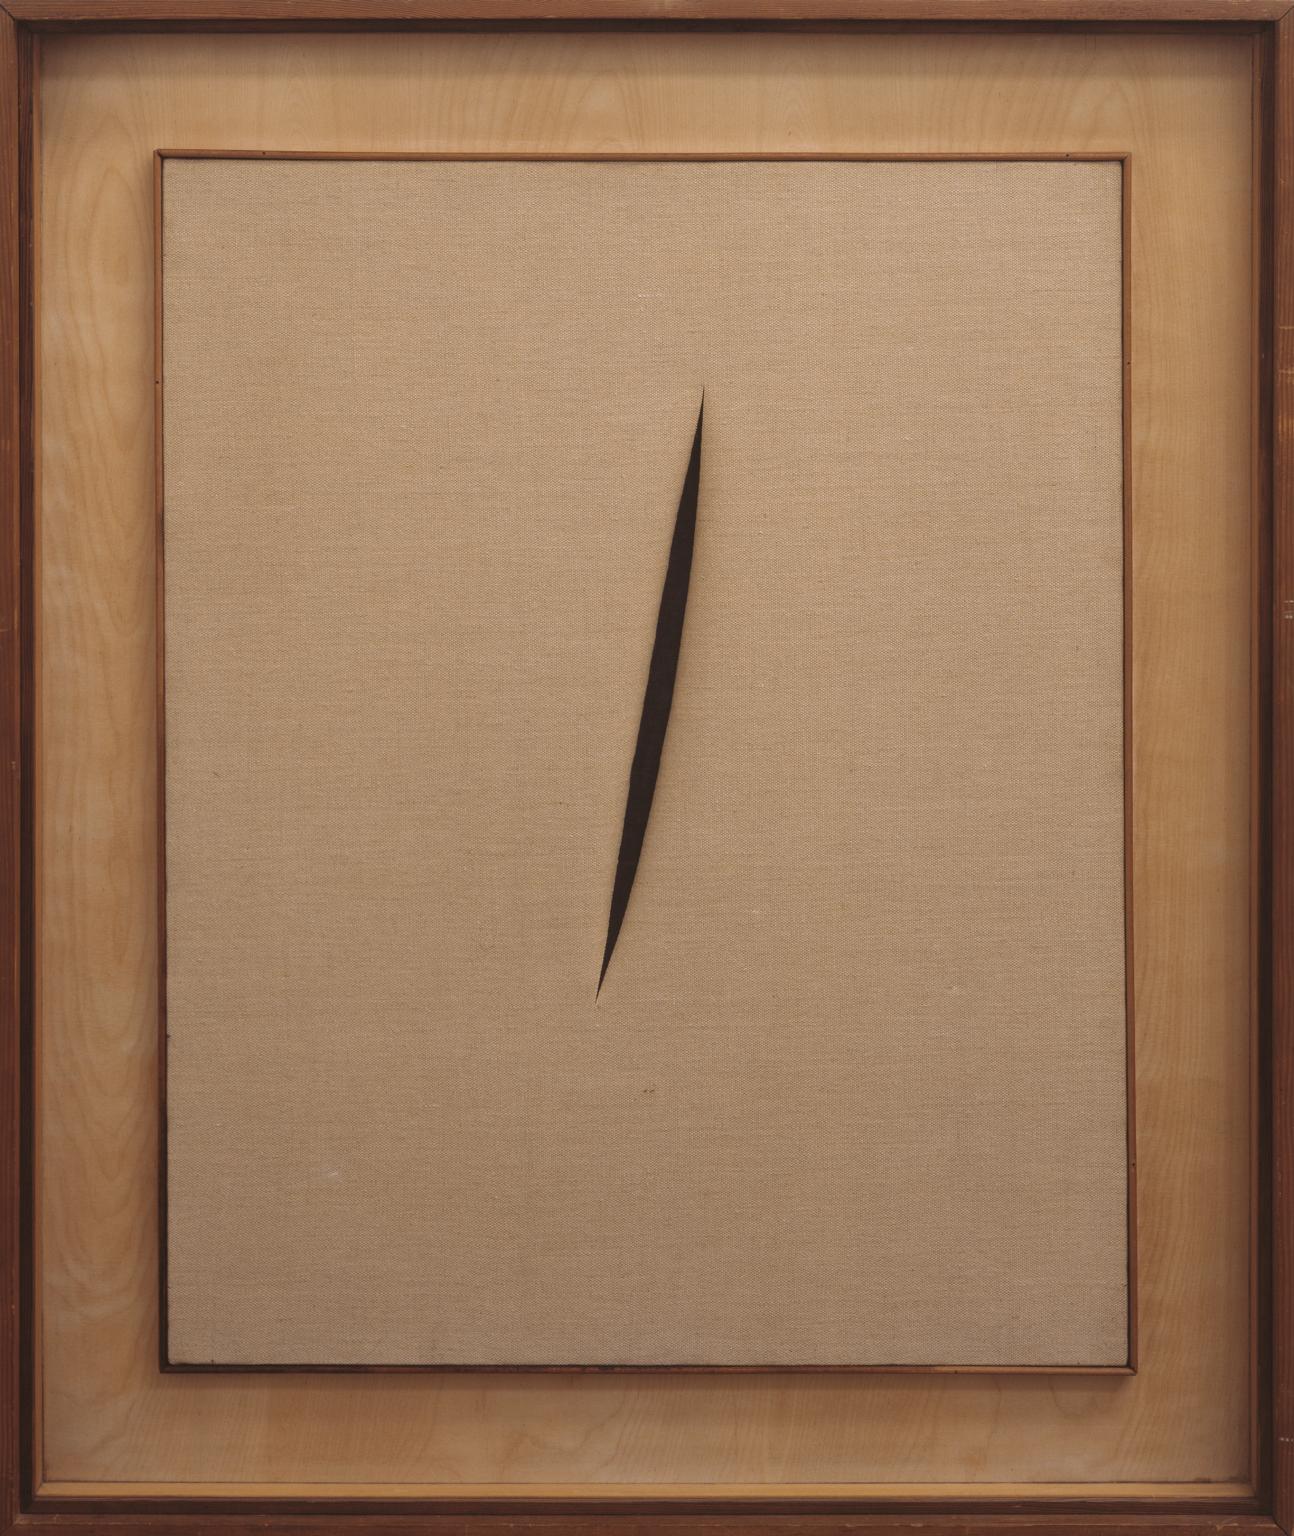 Spatial Concept 'Waiting' 1960 Lucio Fontana 1899-1968 Purchased 1964 http://www.tate.org.uk/art/work/T00694